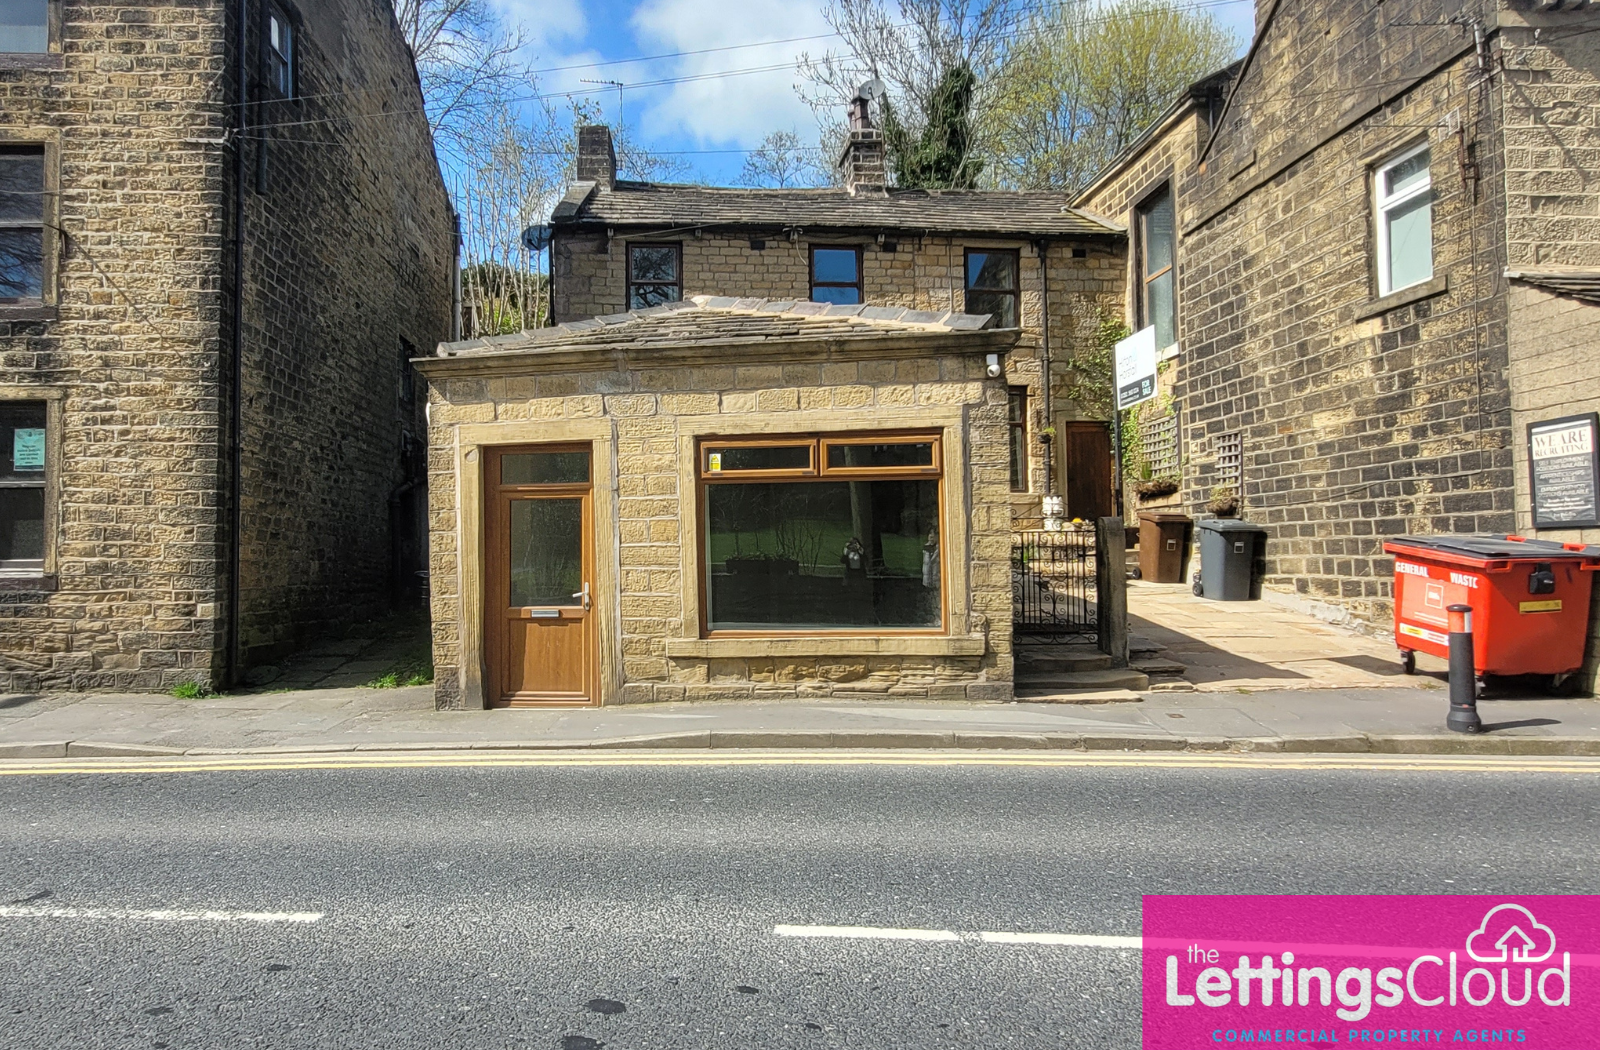 Commercial Property available for rent with The Lettings Cloud. The property is located on Gisburn Road, Barrowford, Nelson, Lancashire